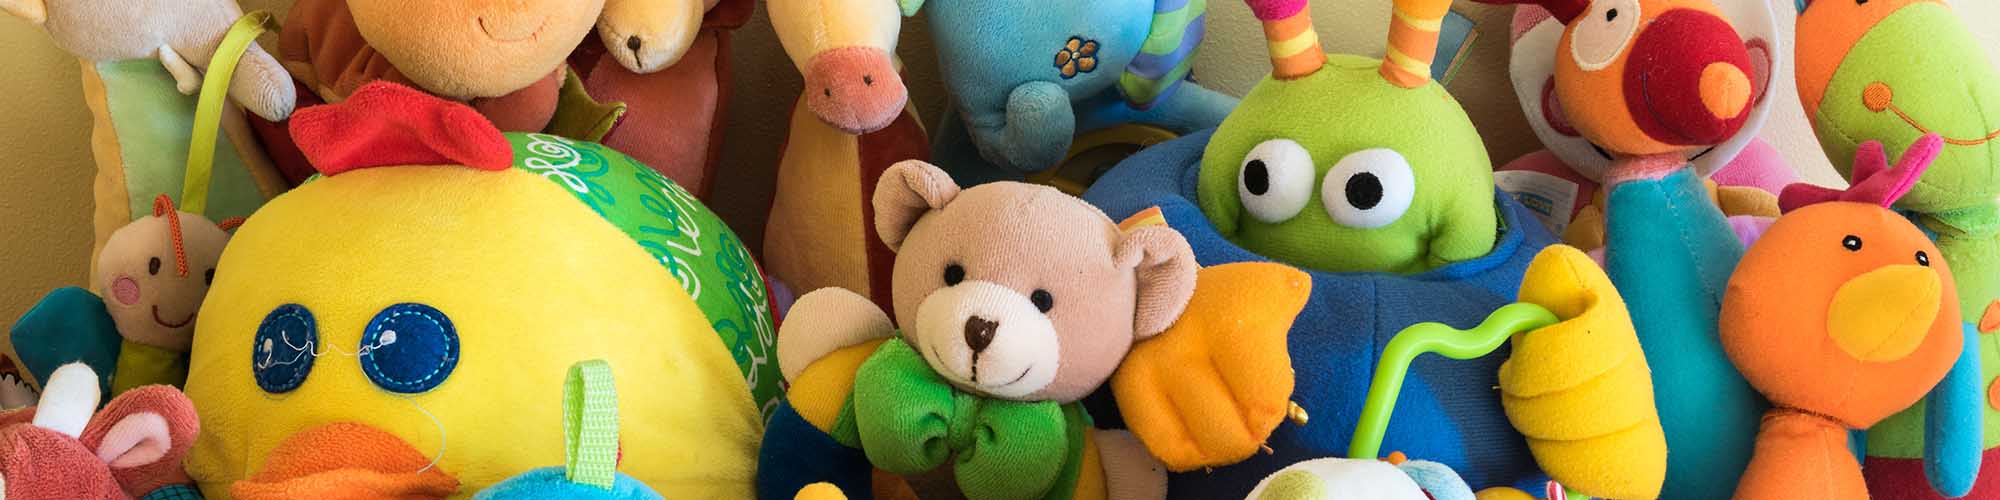 plush toys in a pile